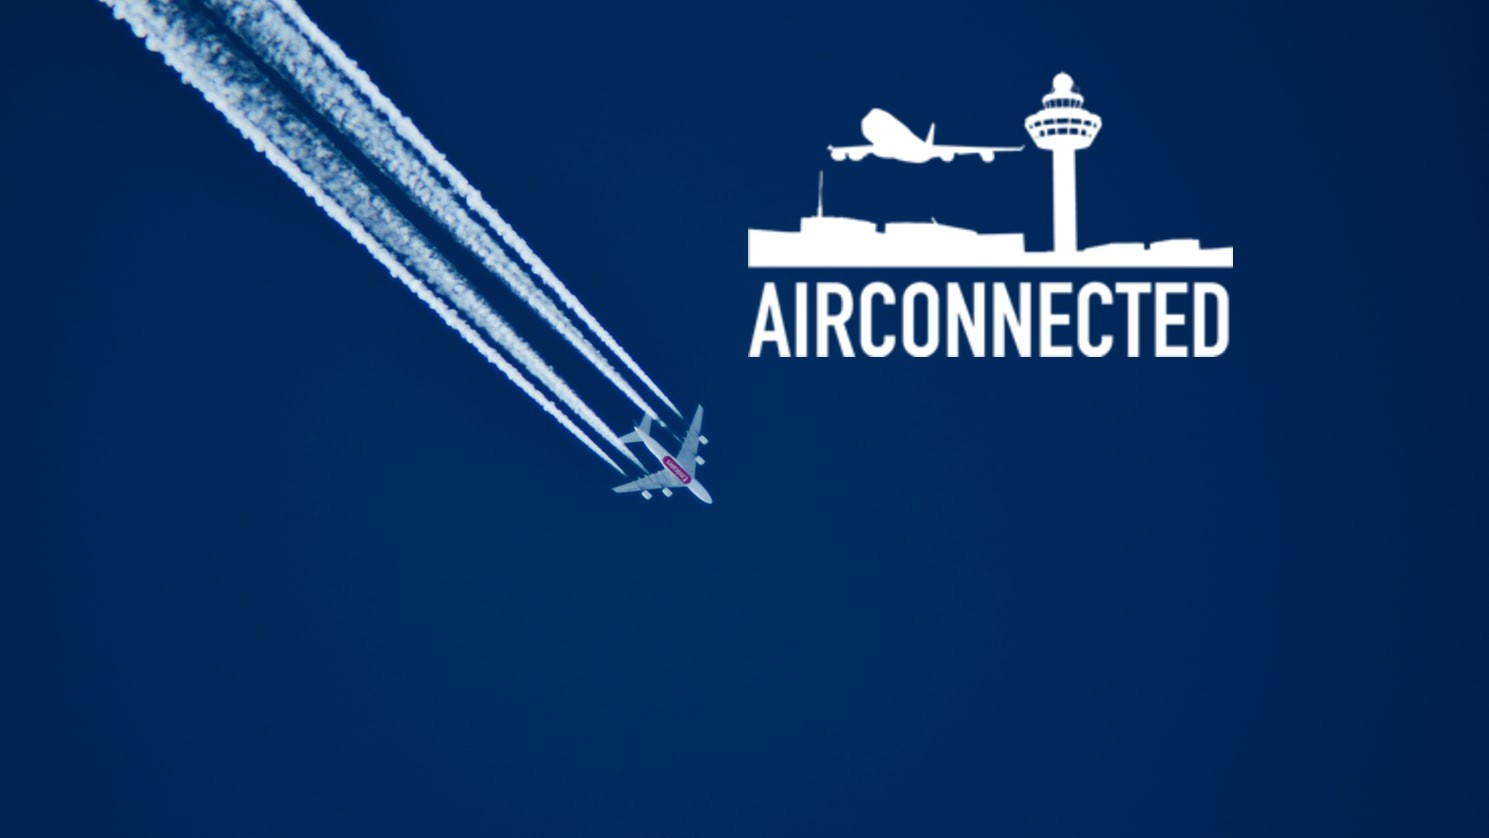 AirConnected 2021